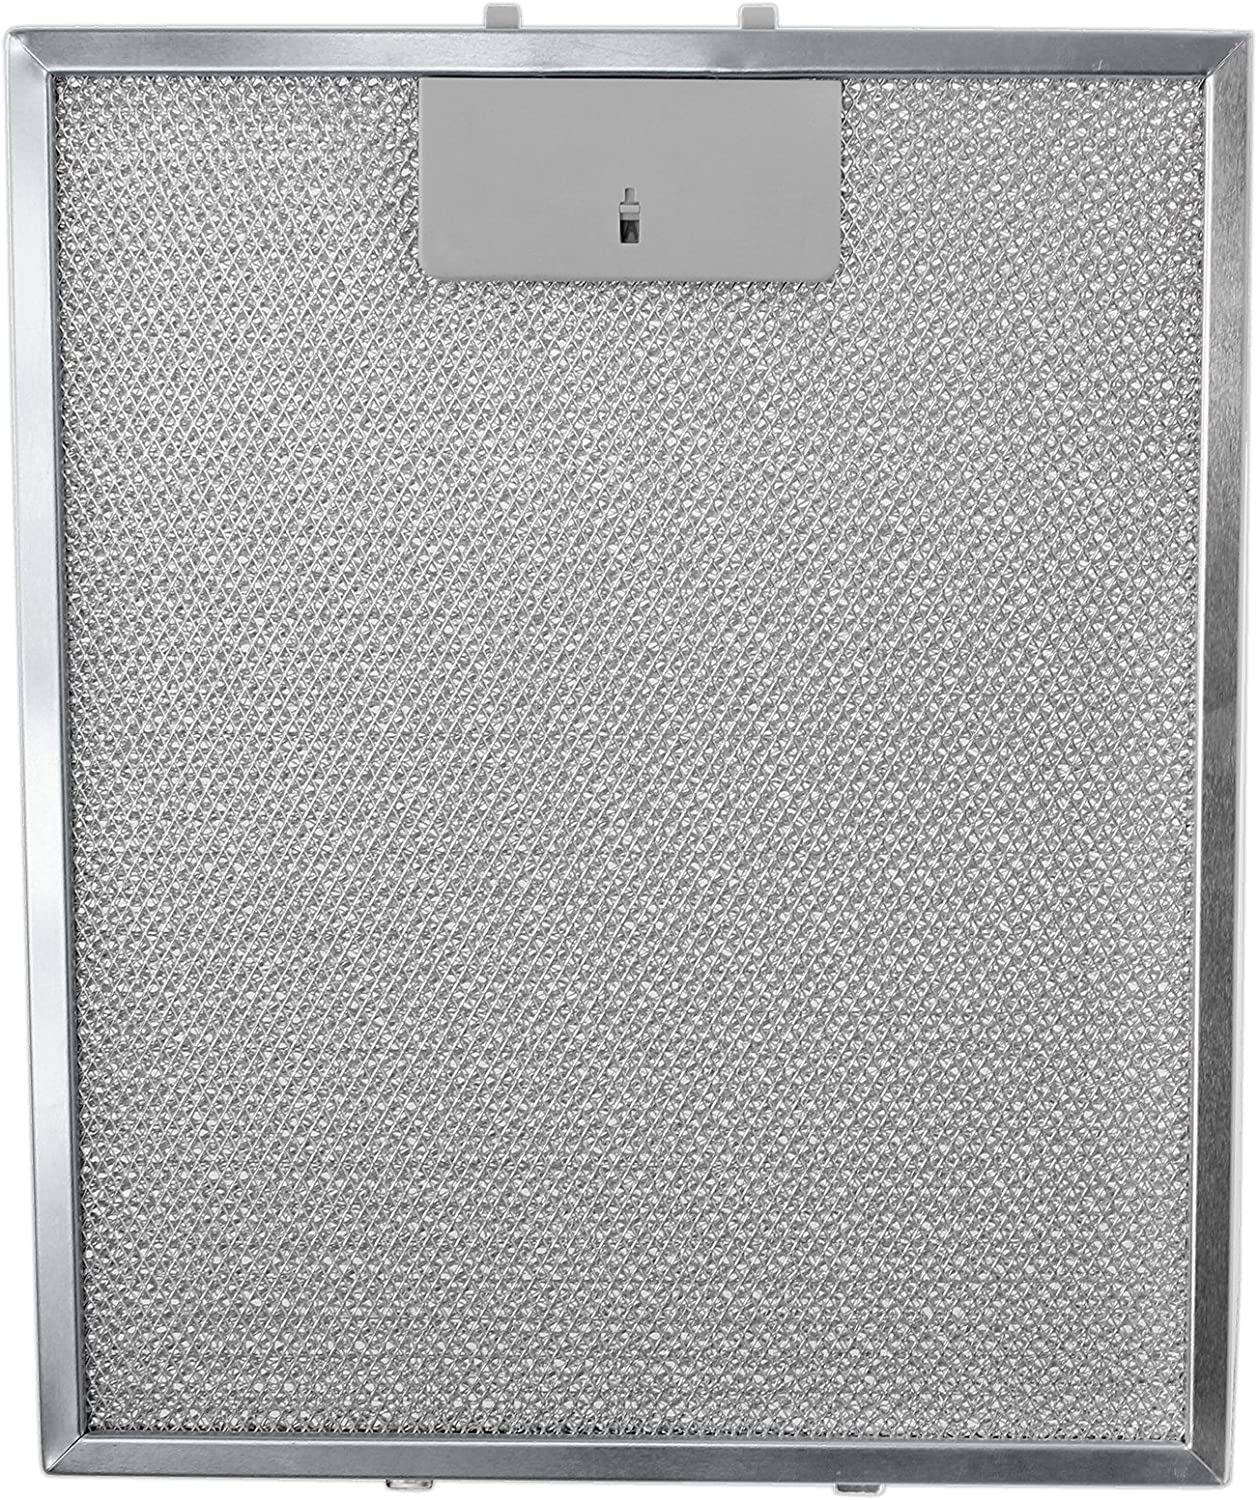 Cooker Hood Metal Mesh Grease Filter for Kitchen Extractor Fan Vent (Silver, 300 x 250 mm)